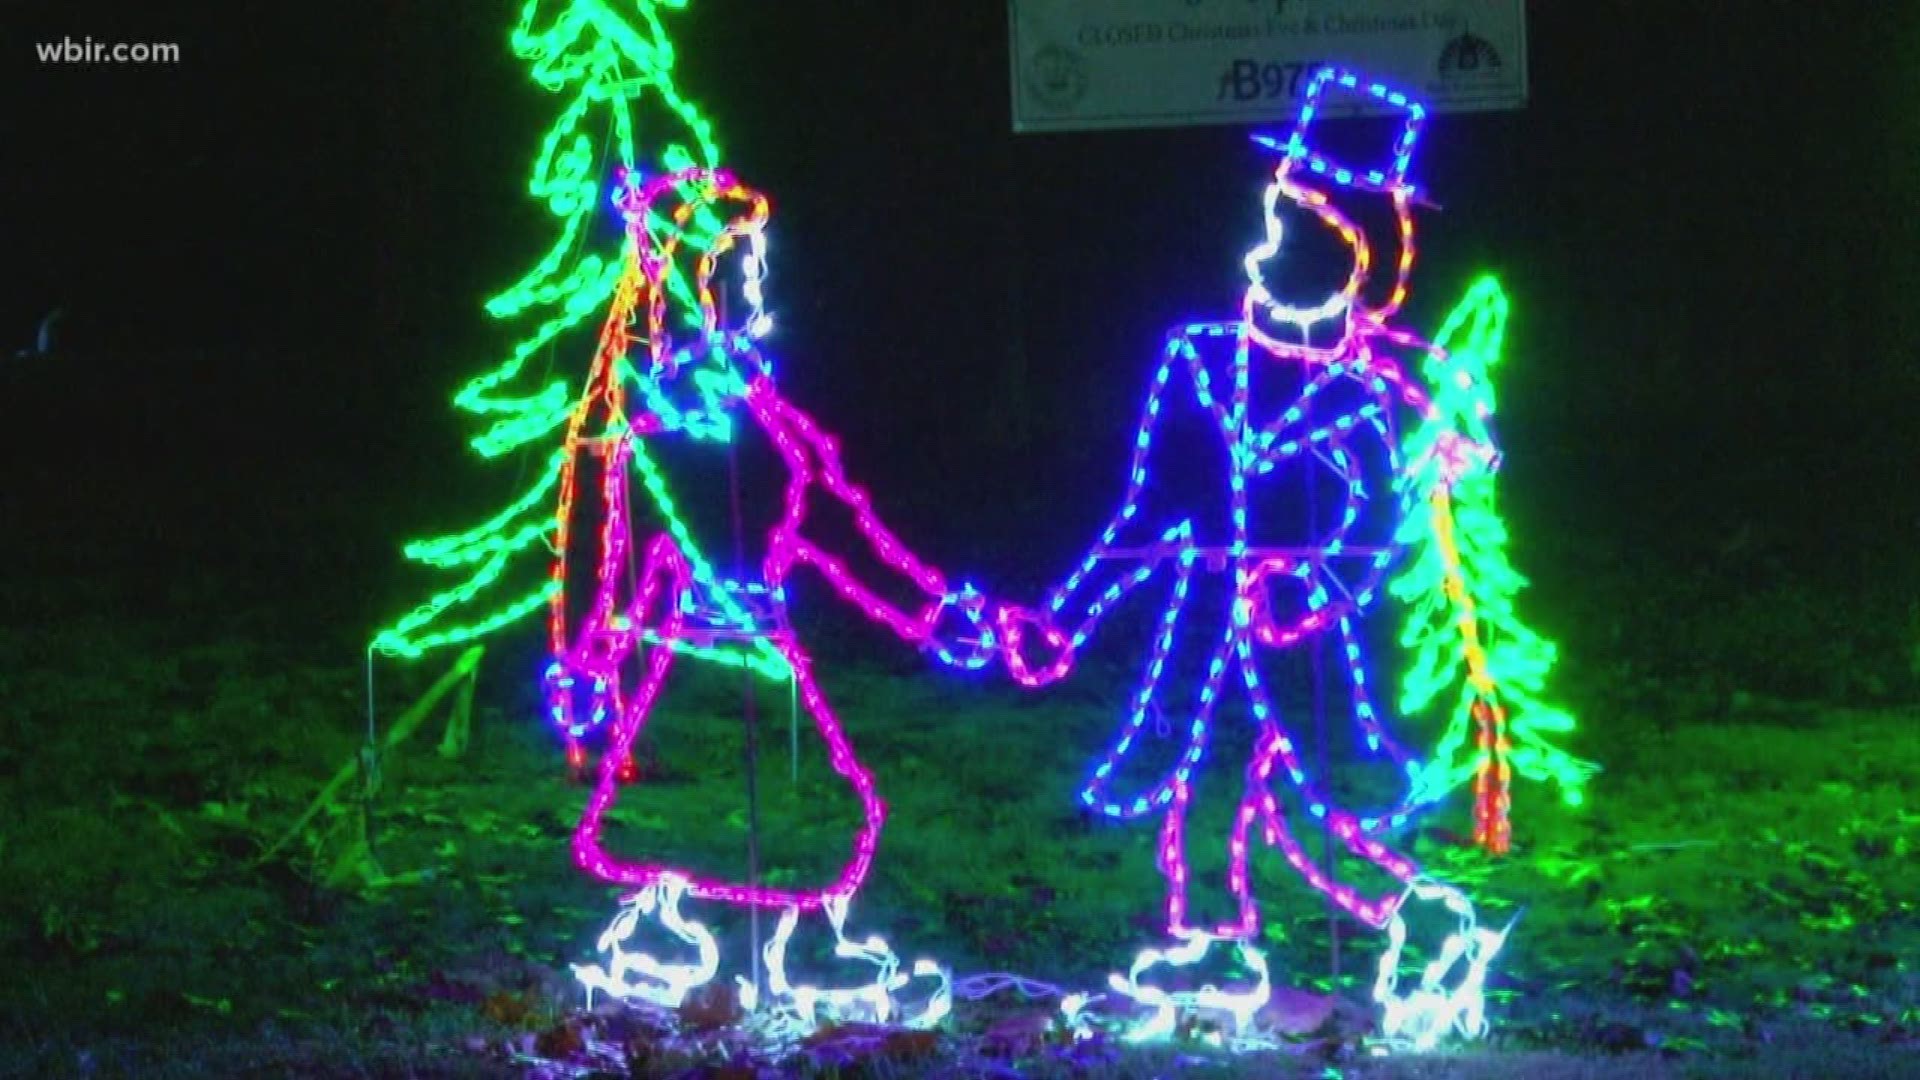 Knox Co. kicks off their Holiday Festival of Lights on Dec. (6:30pm). It runs daily from 6 to 9pm until Dec. 31 (closed Christmas Day). Nov. 26, 2019-4pm.